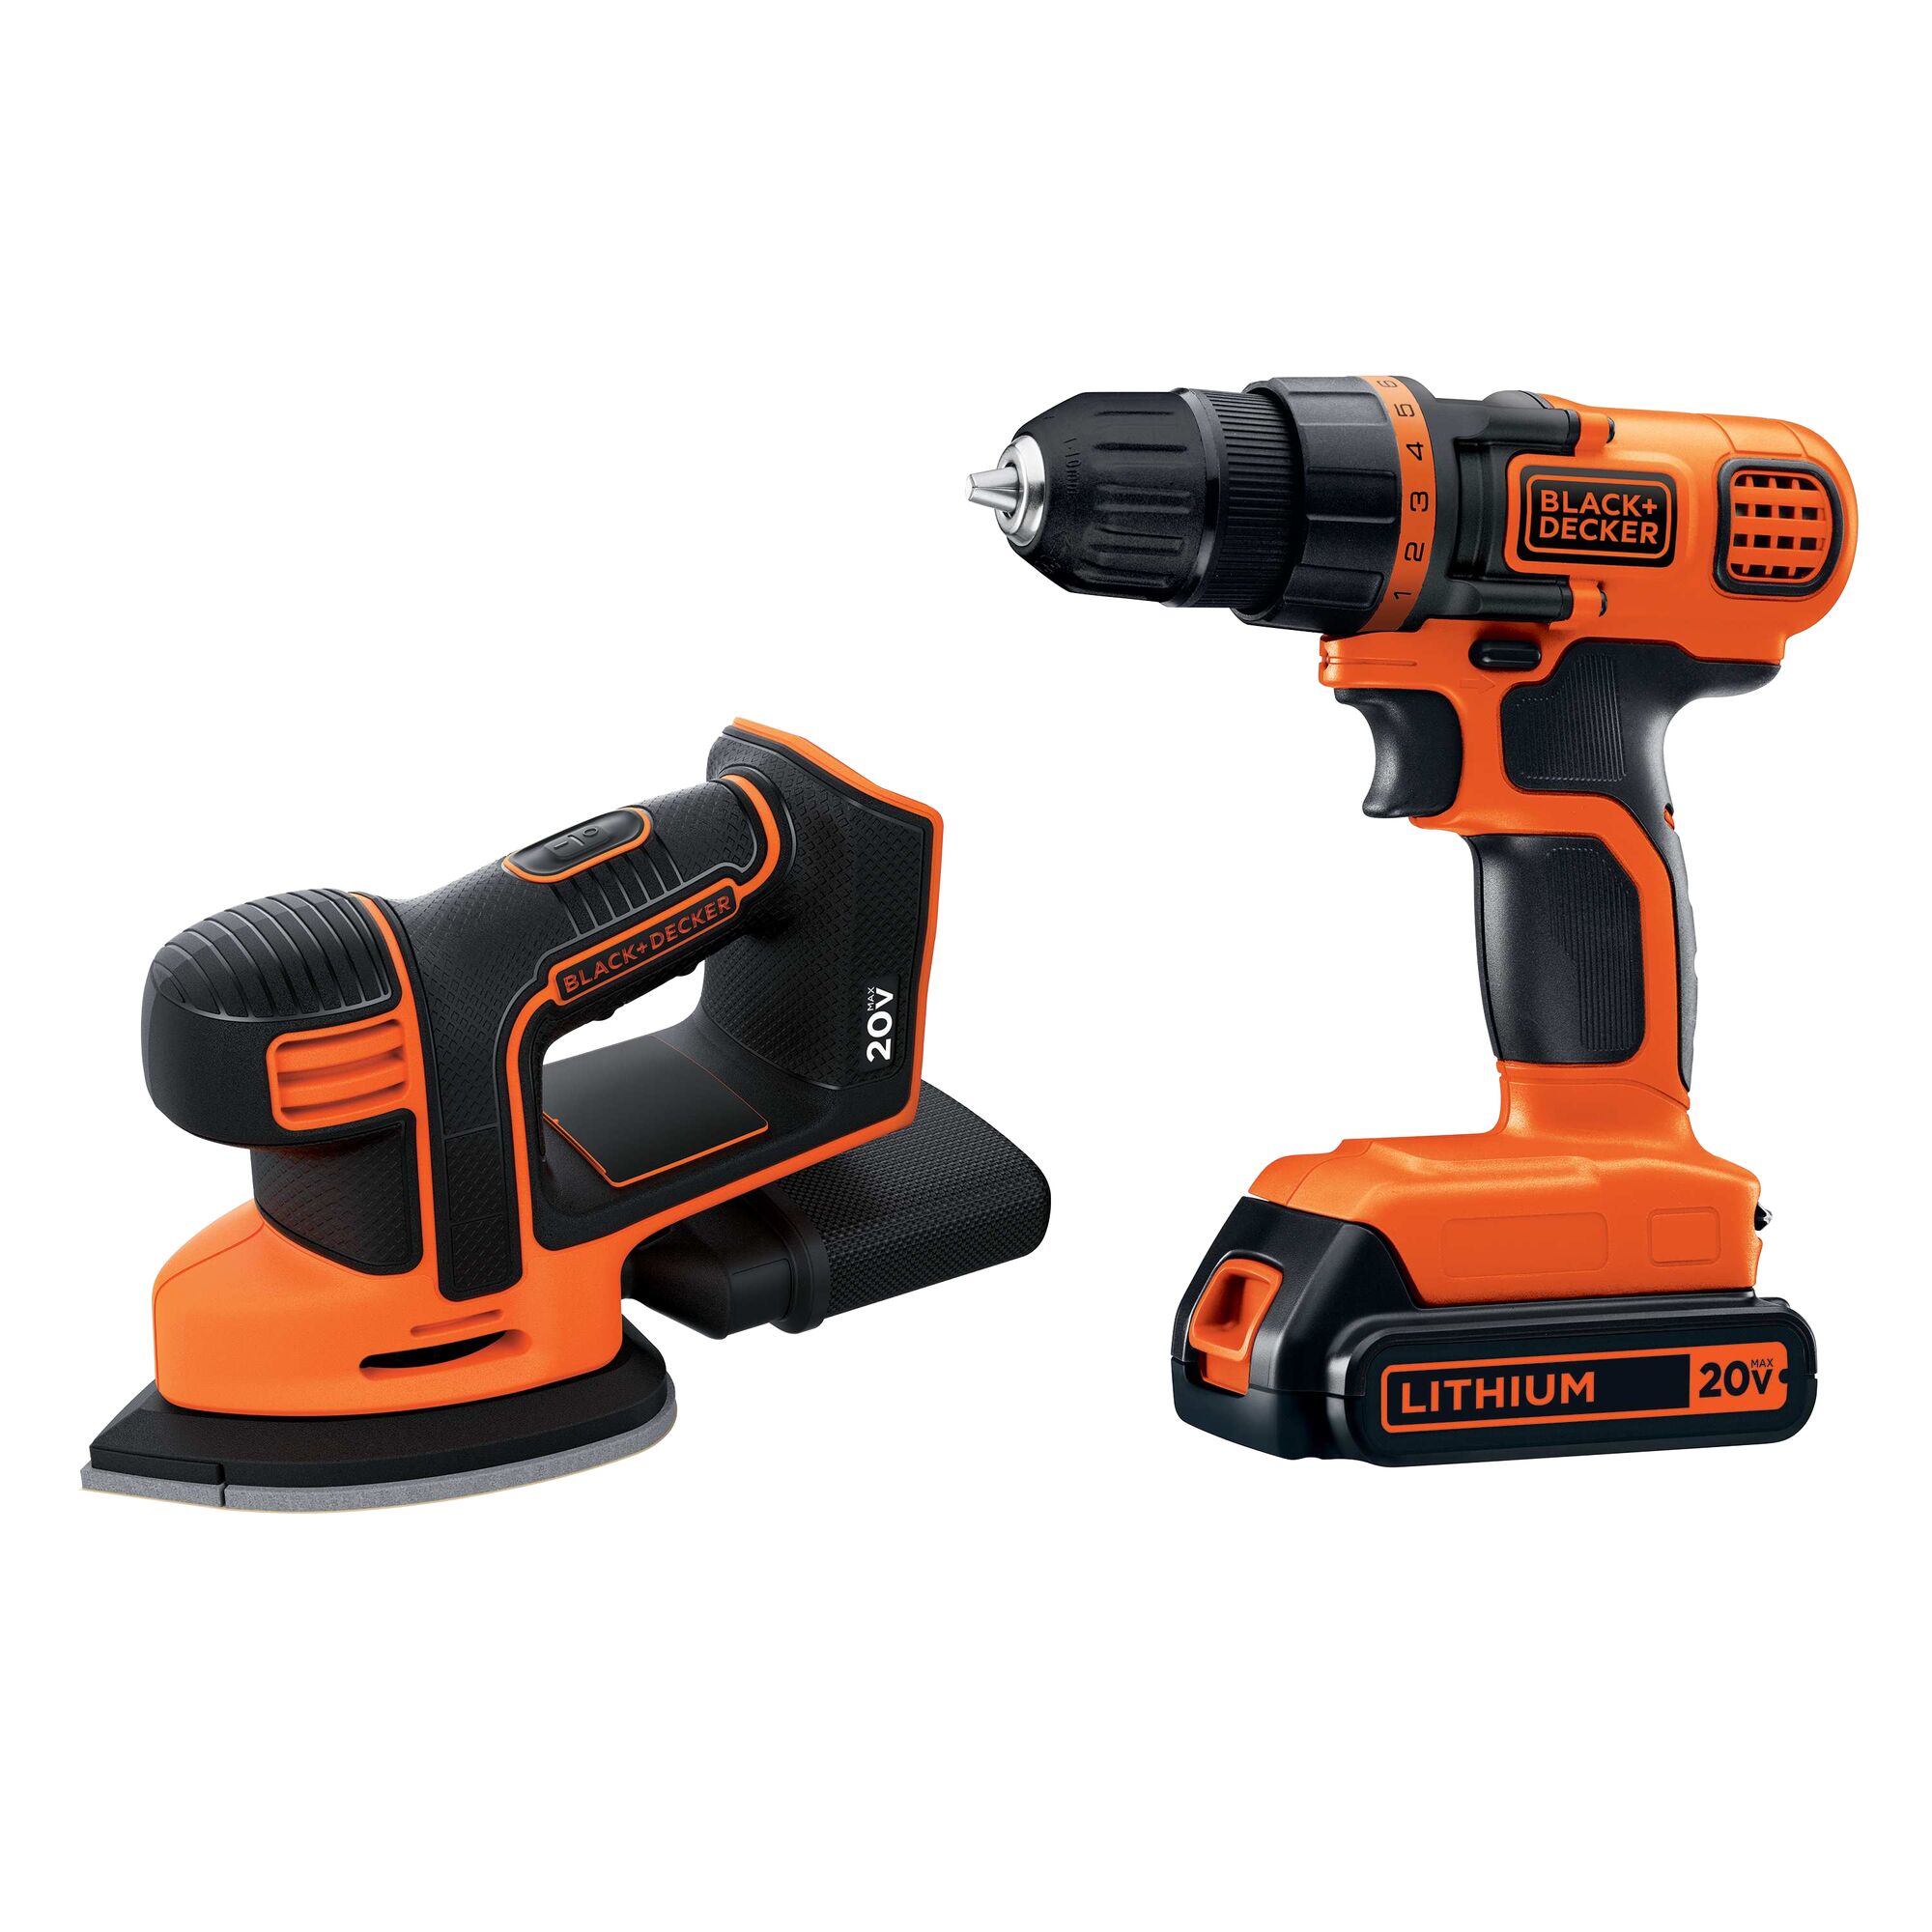 Profile of corded drill or driver and mouse detail sander combo kit.